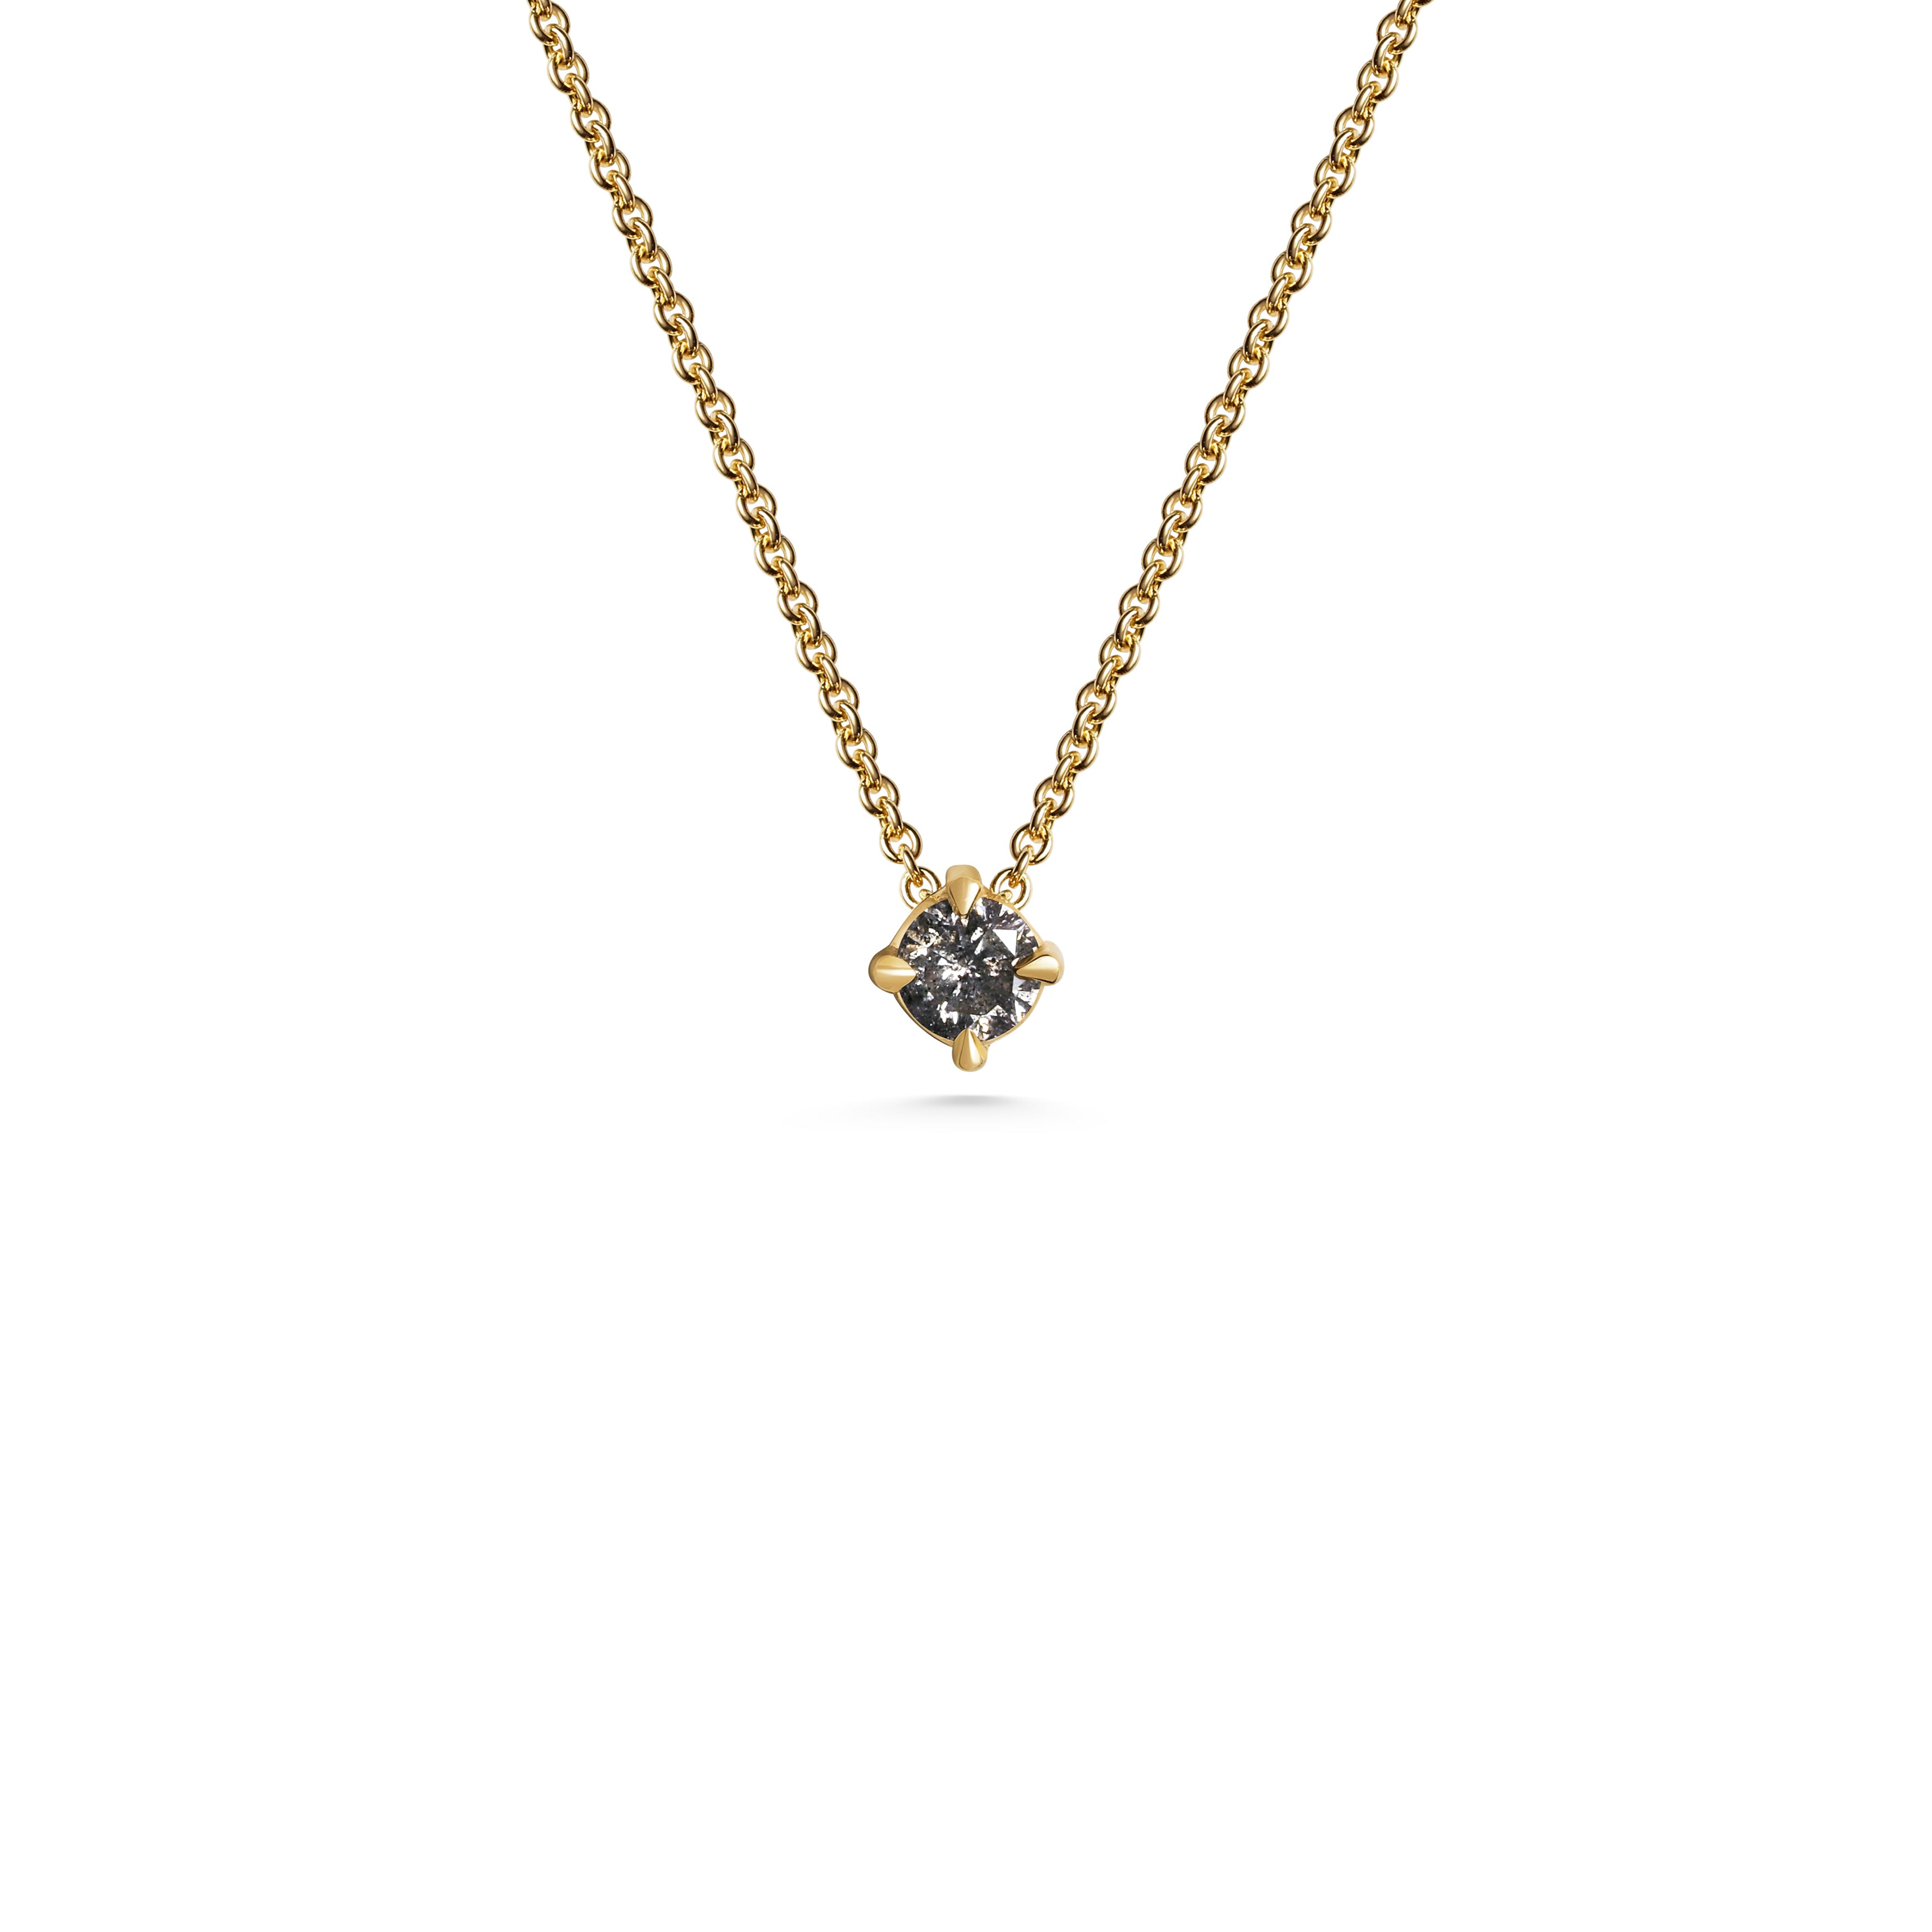 The 3mm Grey Diamond Slider Necklace by East London jeweller Rachel Boston | Discover our collections of unique and timeless engagement rings, wedding rings, and modern fine jewellery.